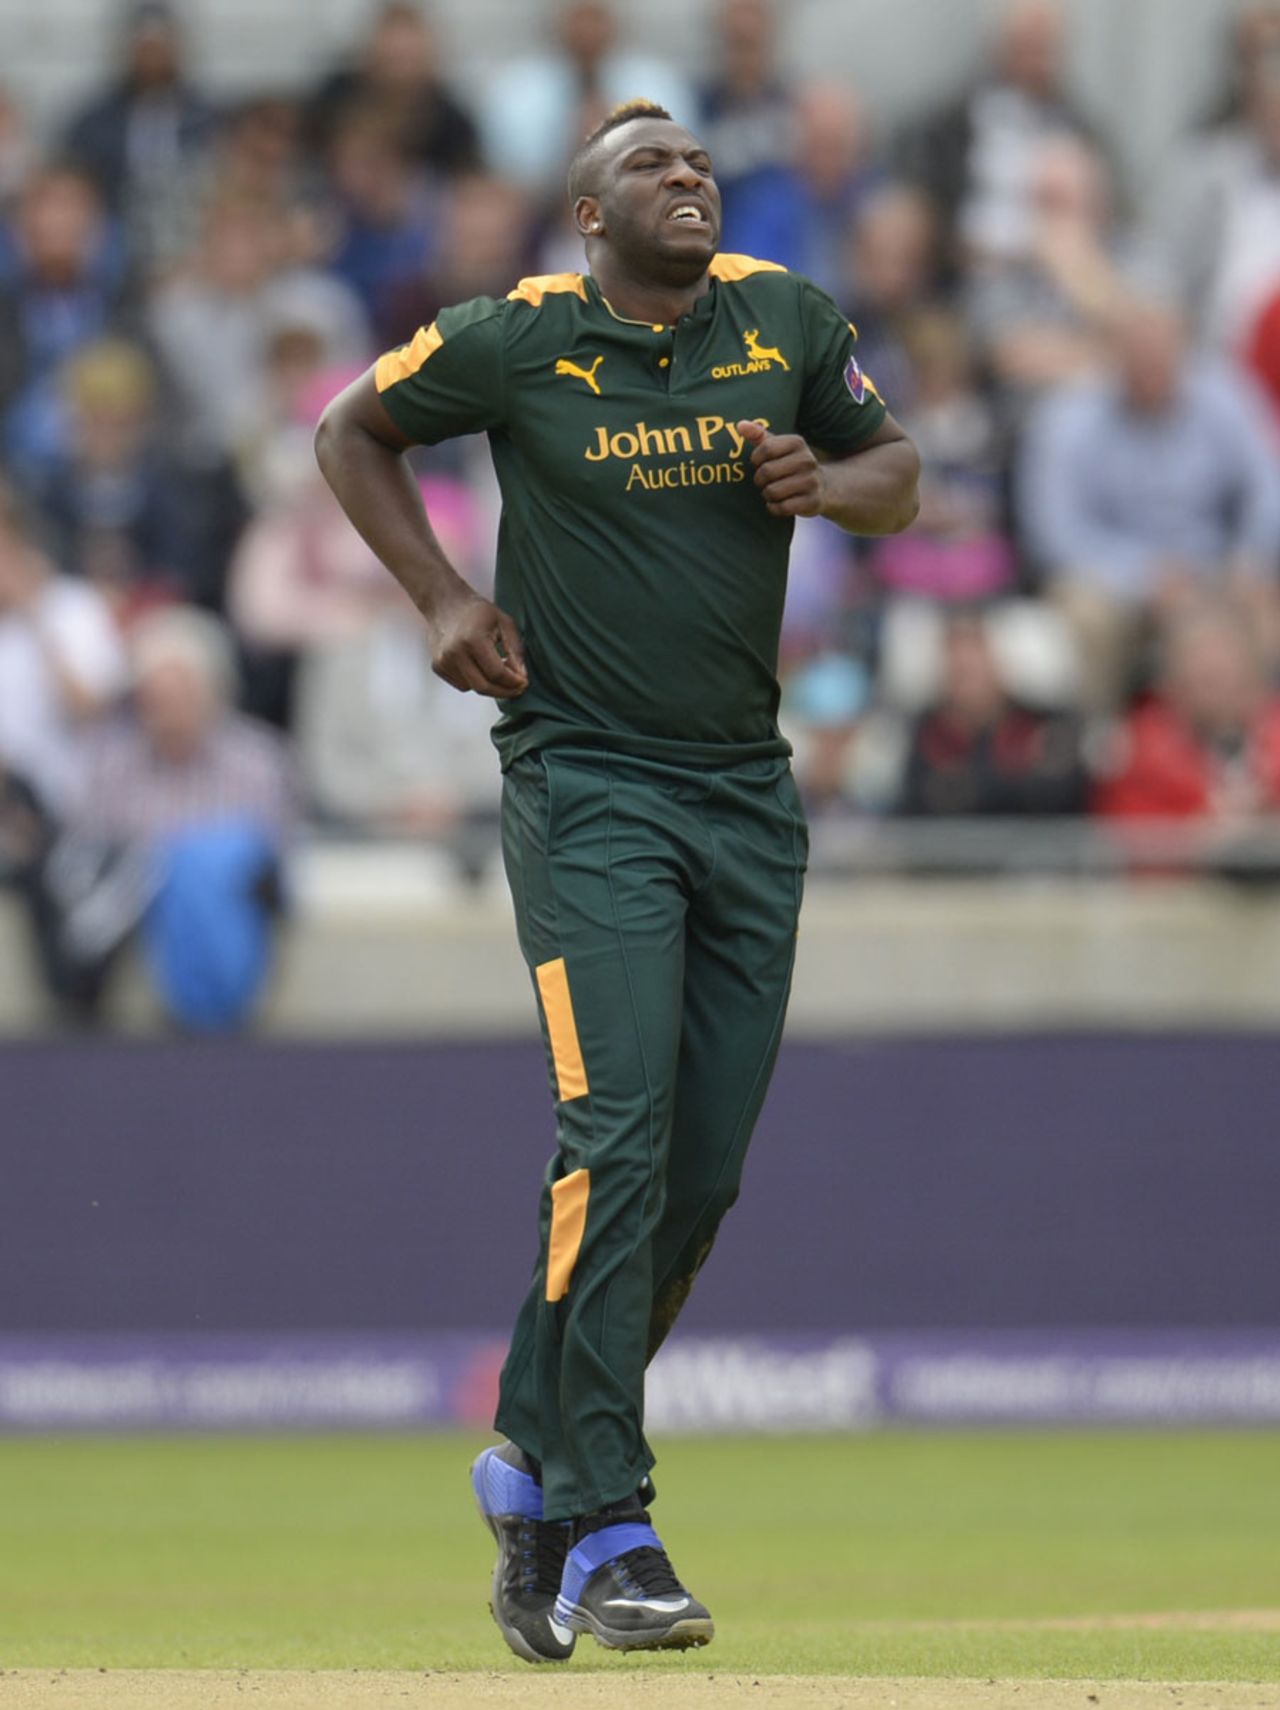 Andre Russell picked up three wickets despite bowling with an injury, Nottinghamshire v Northamptonshire, NatWest T20 Blast, 1st semi-final, Edgbaston, August 20, 2016